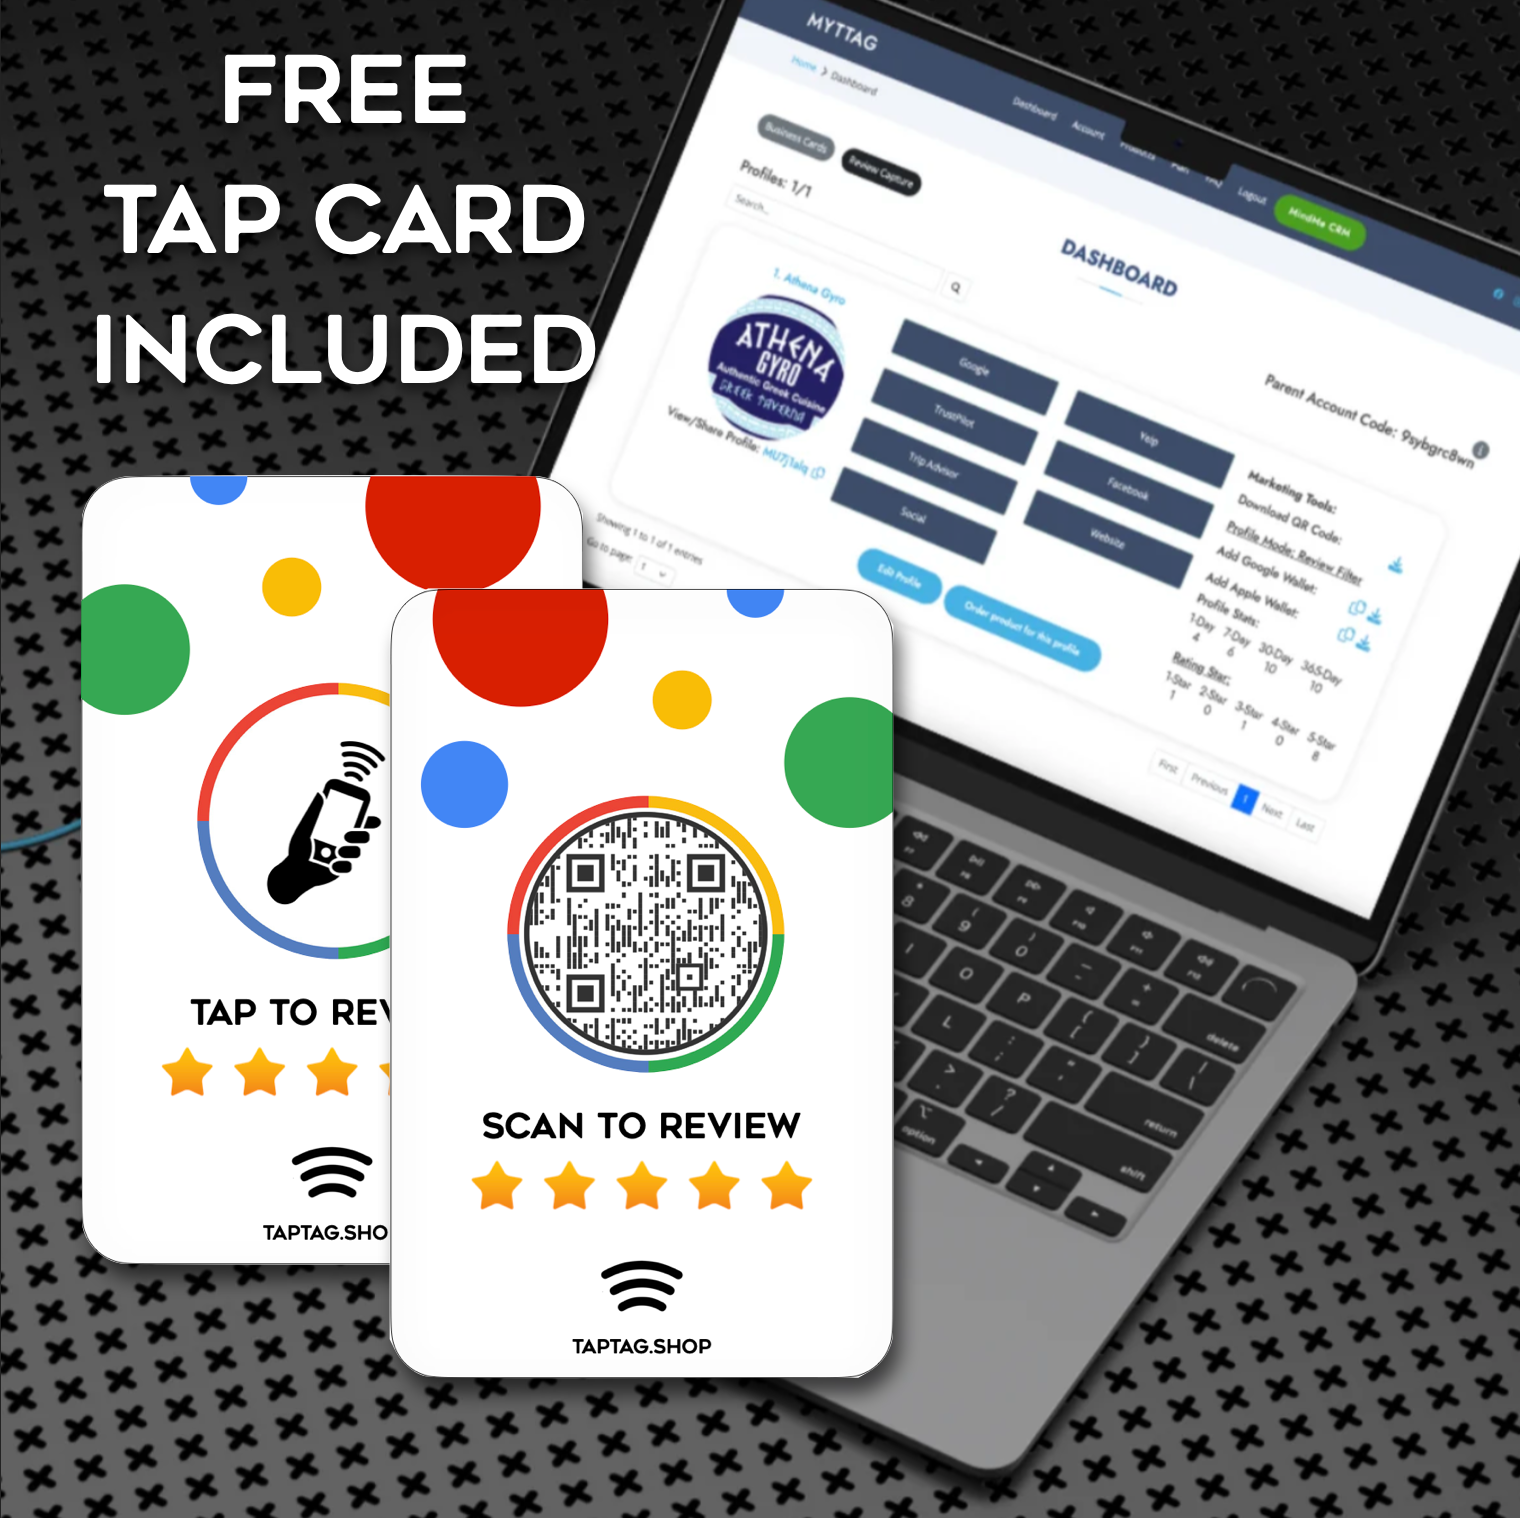 Free review tap card with purchase